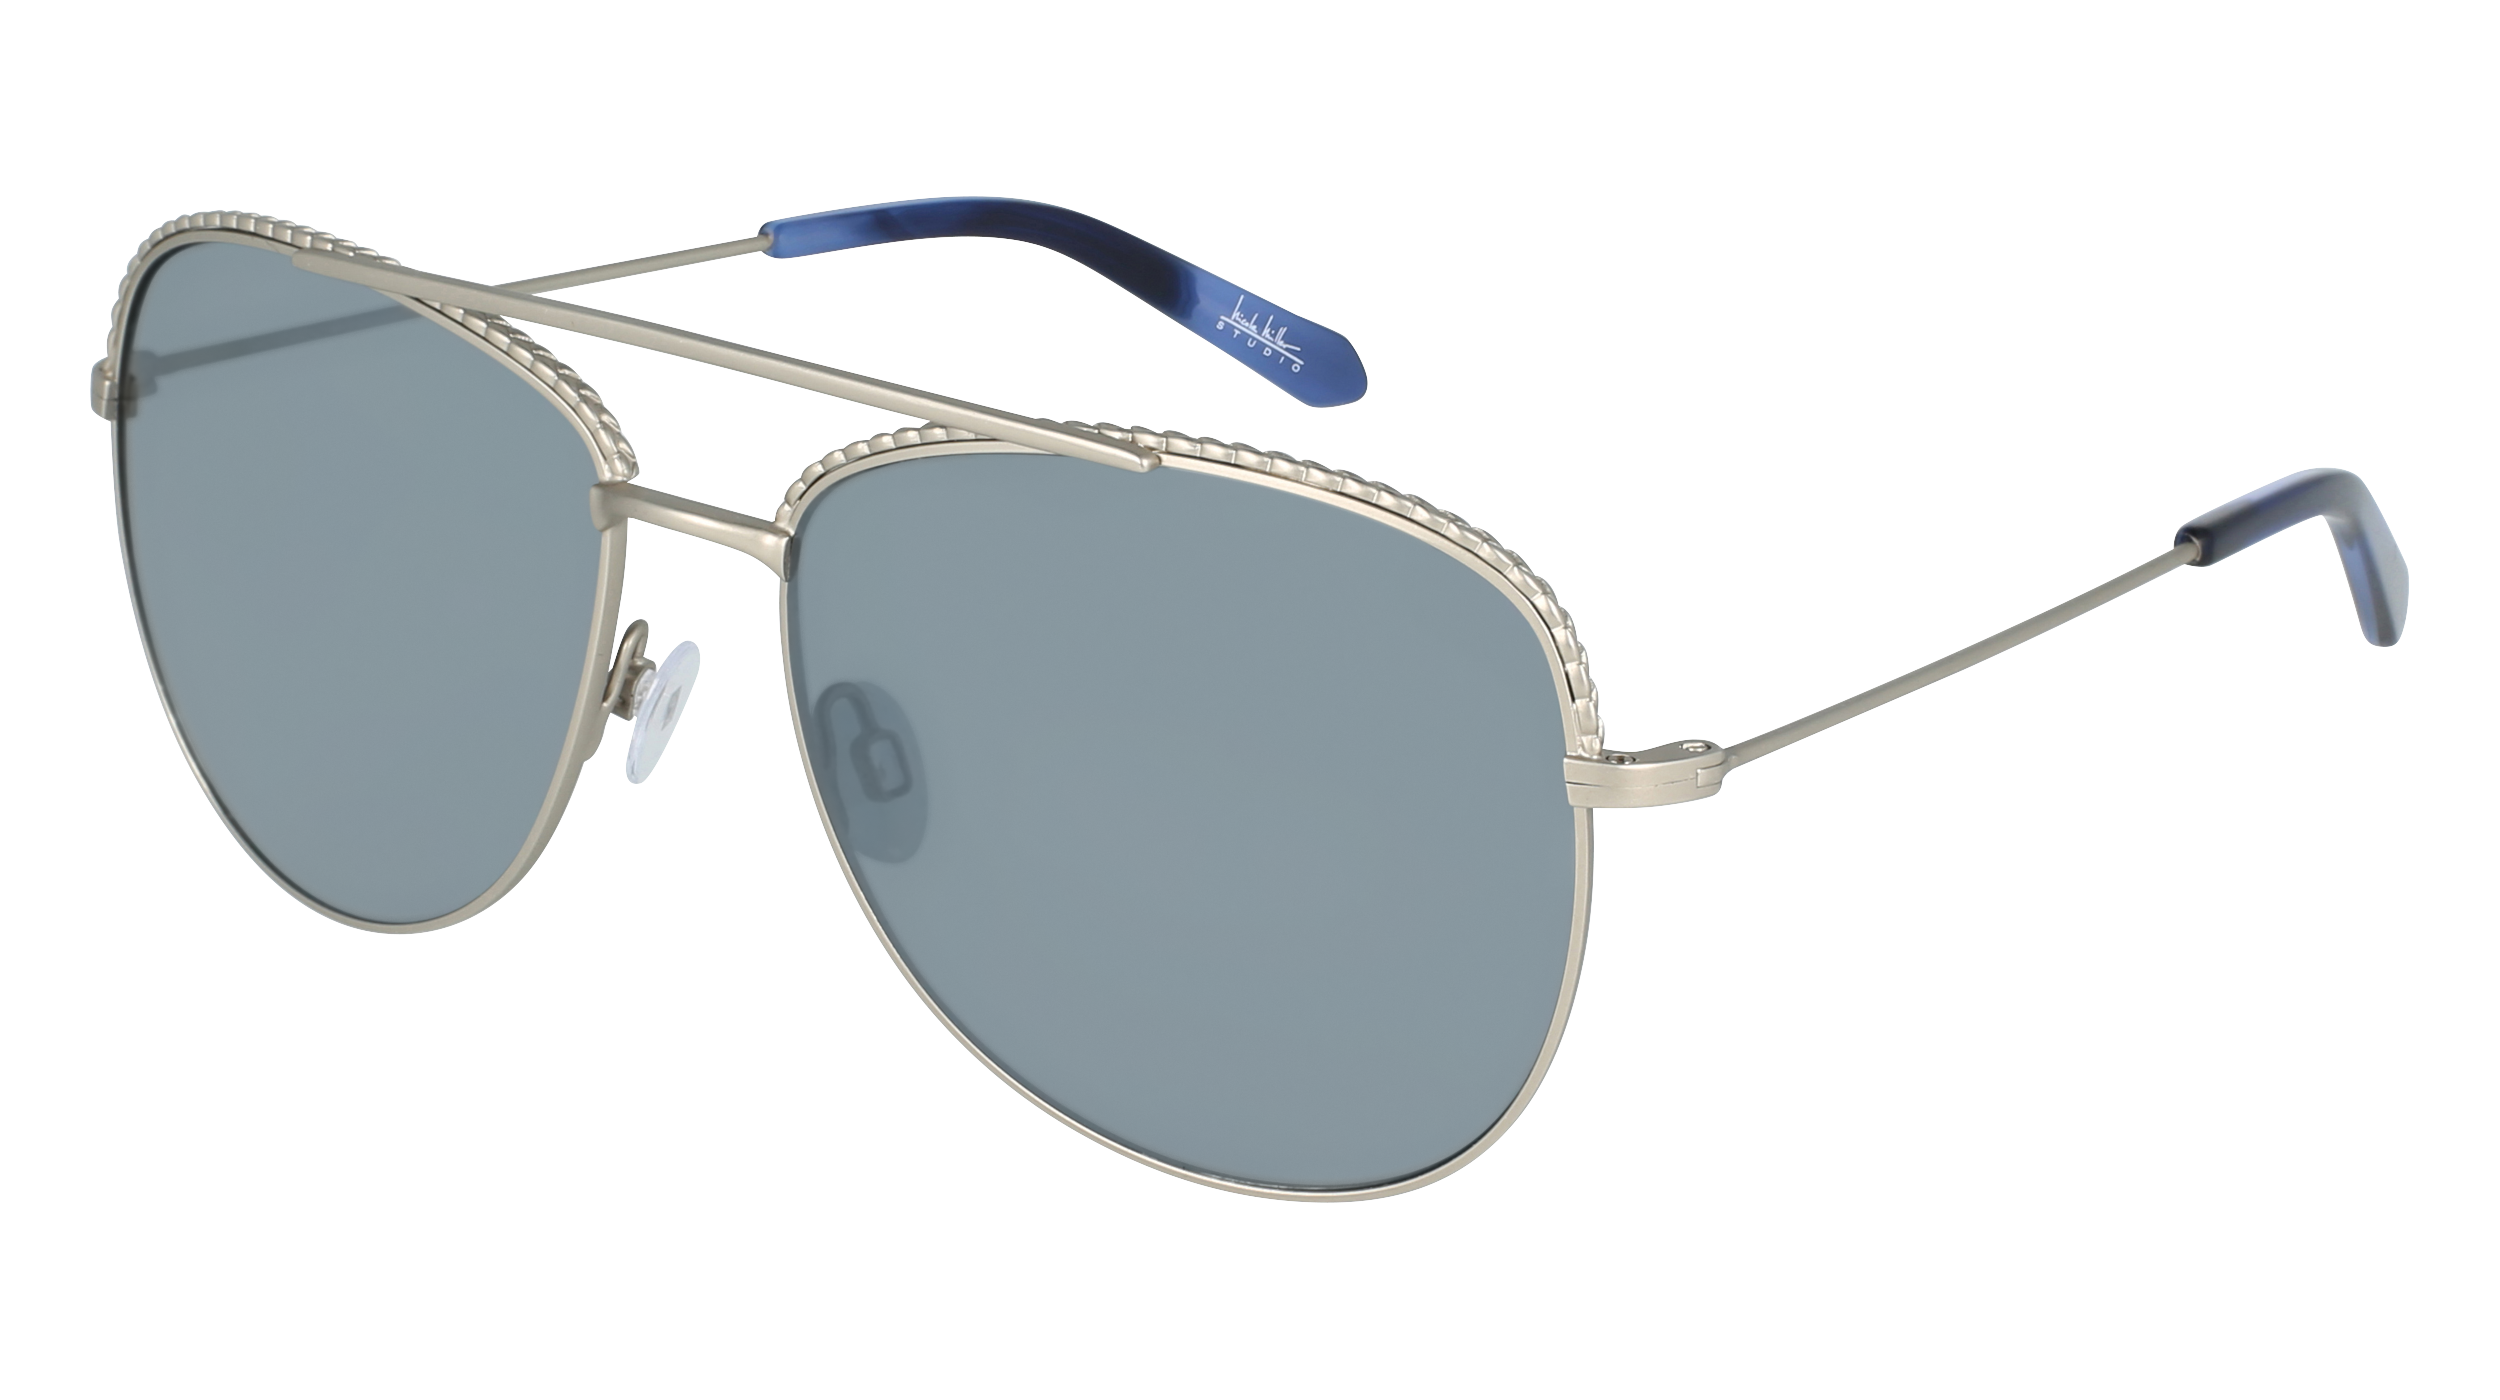 N NMS 14 women's sunglasses (from the side)